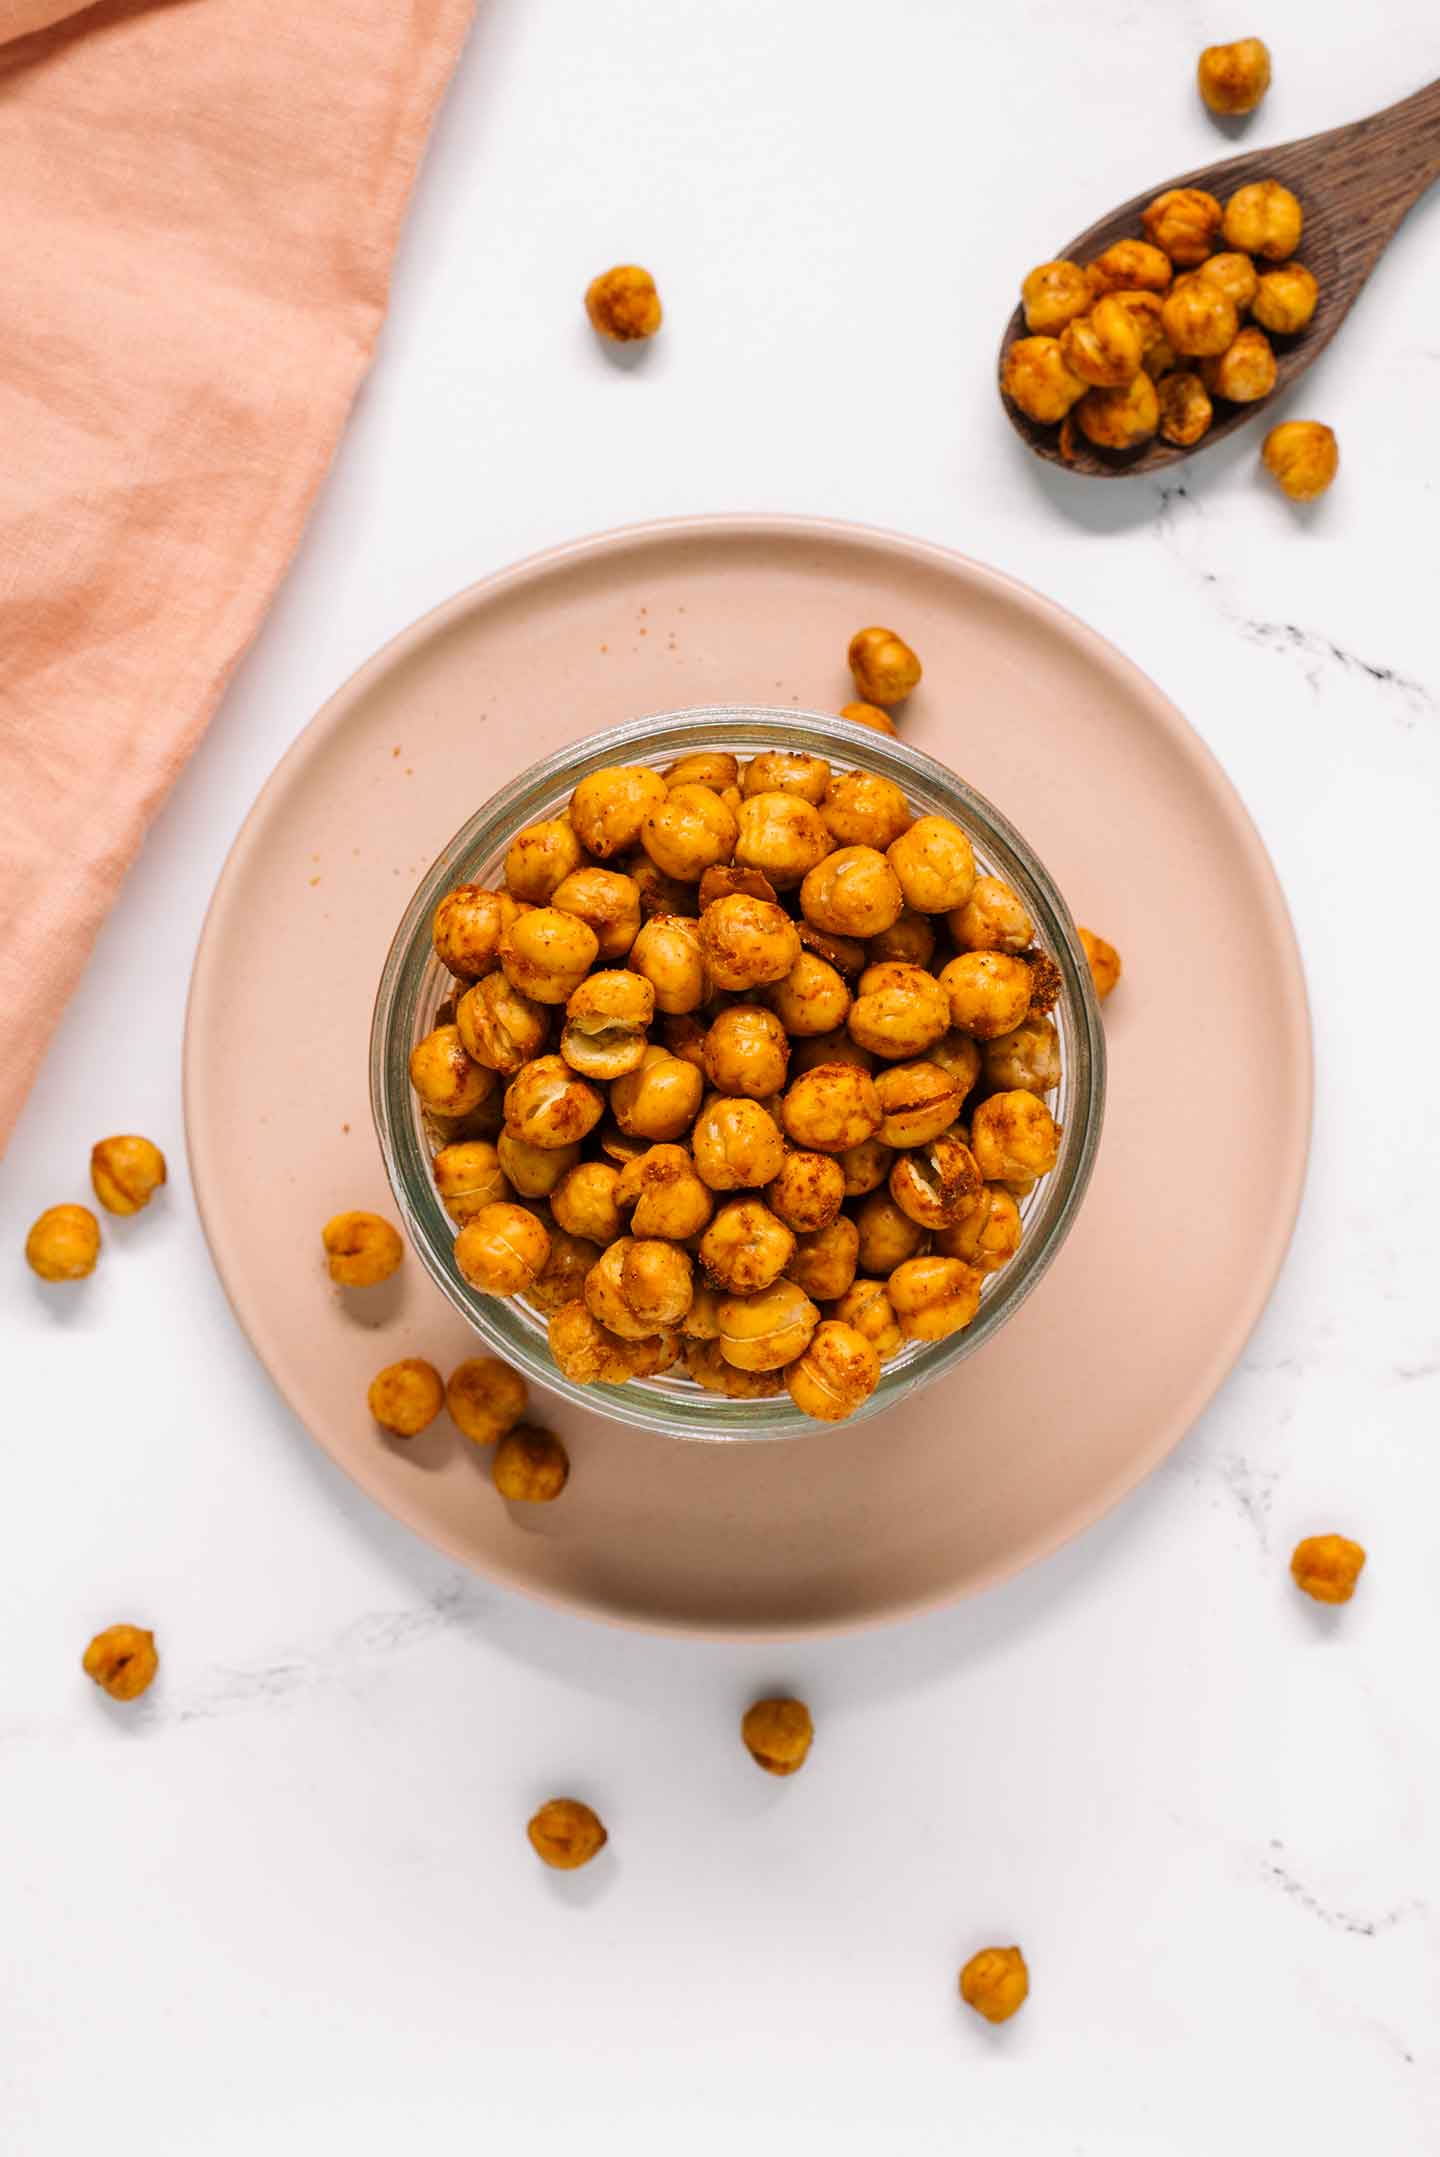 Top down view of crunchy roasted chickpeas in a small bowl. A spoon rests nearby with crunchy chickpeas spilling from it.